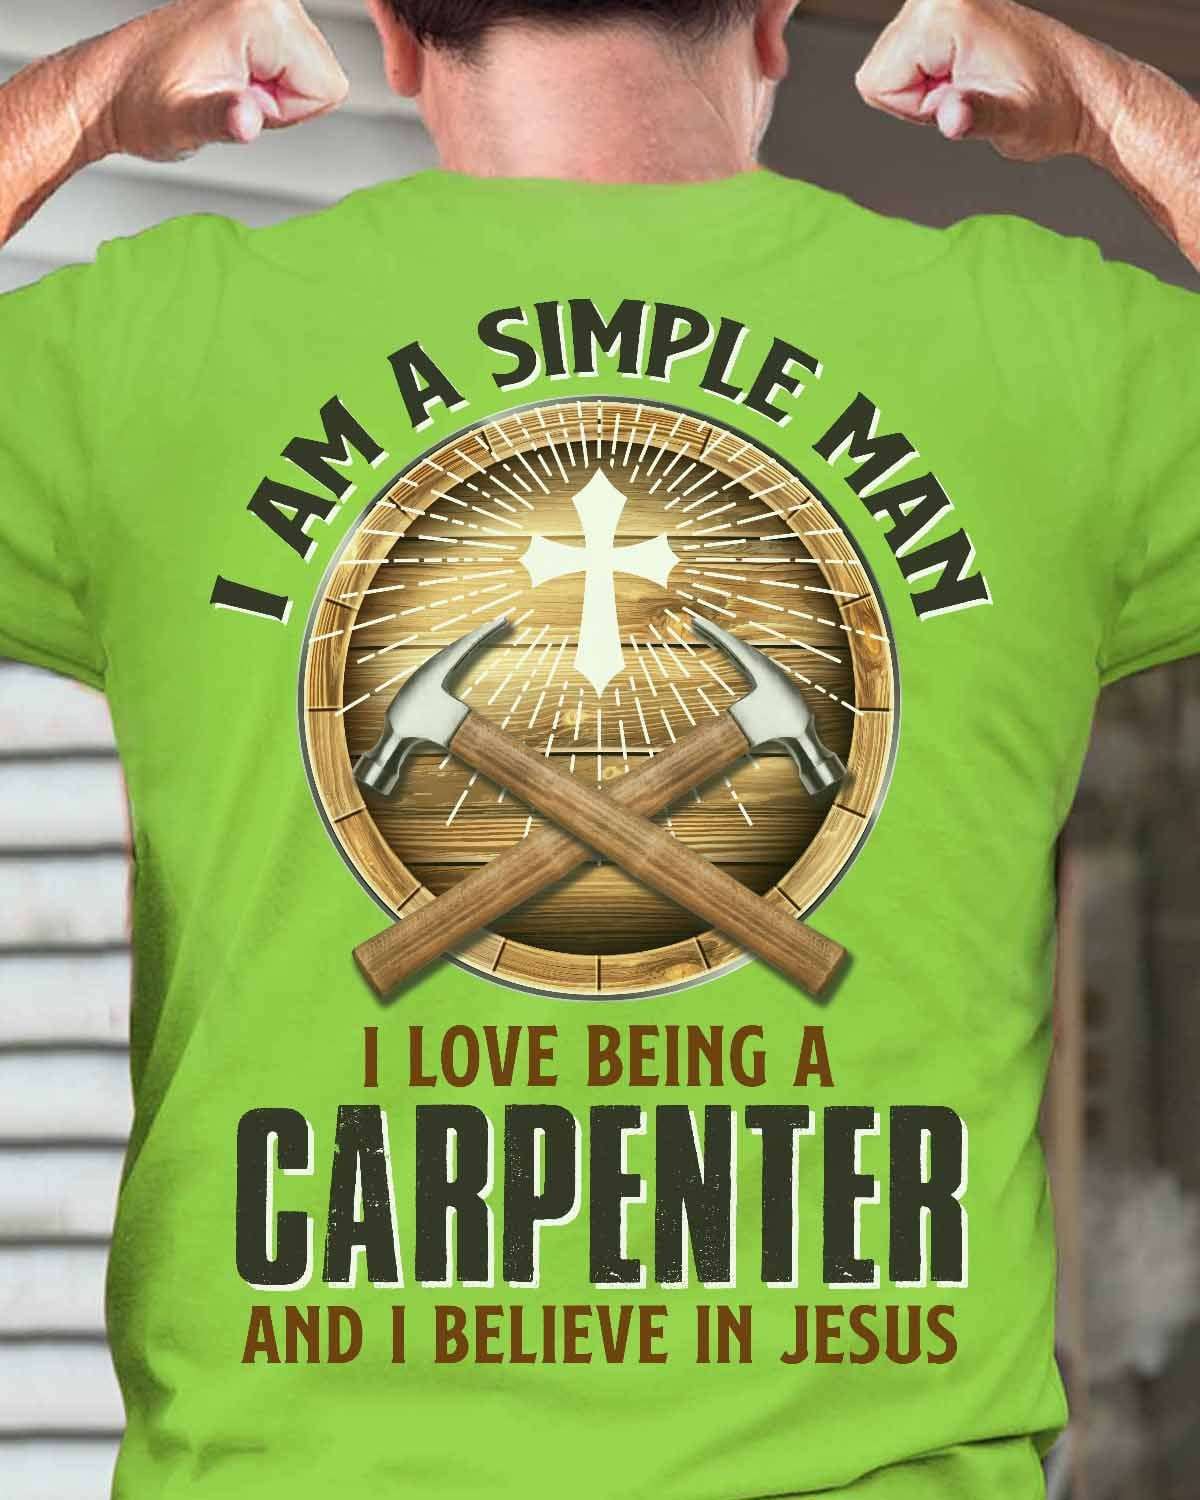 I am a simple men I love being a carpenter and I believe in Jesus - Jesus the god, carpenter the job